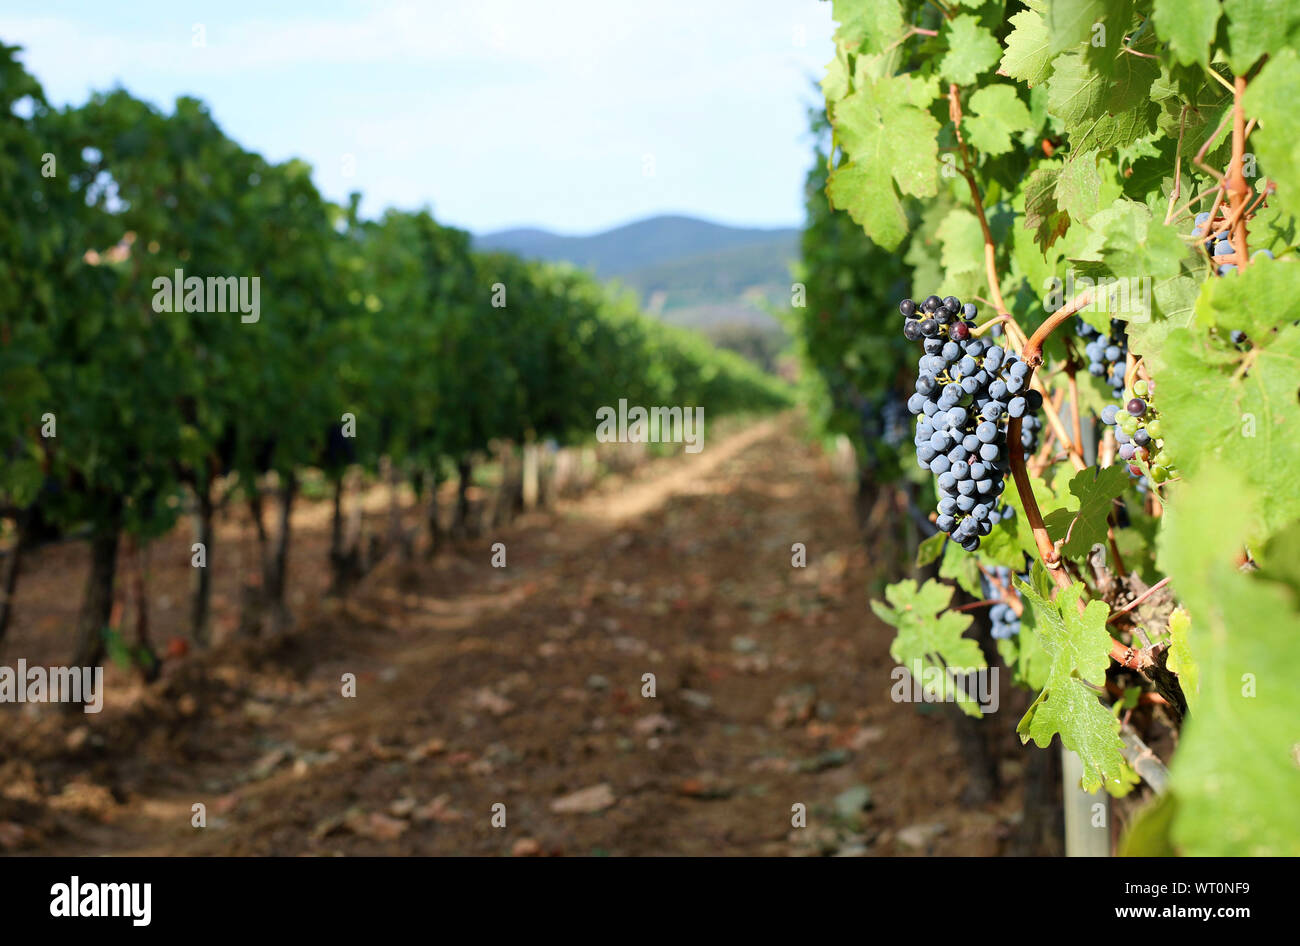 View of vineyards and ripe grapes in Tuscany, Italy Stock Photo